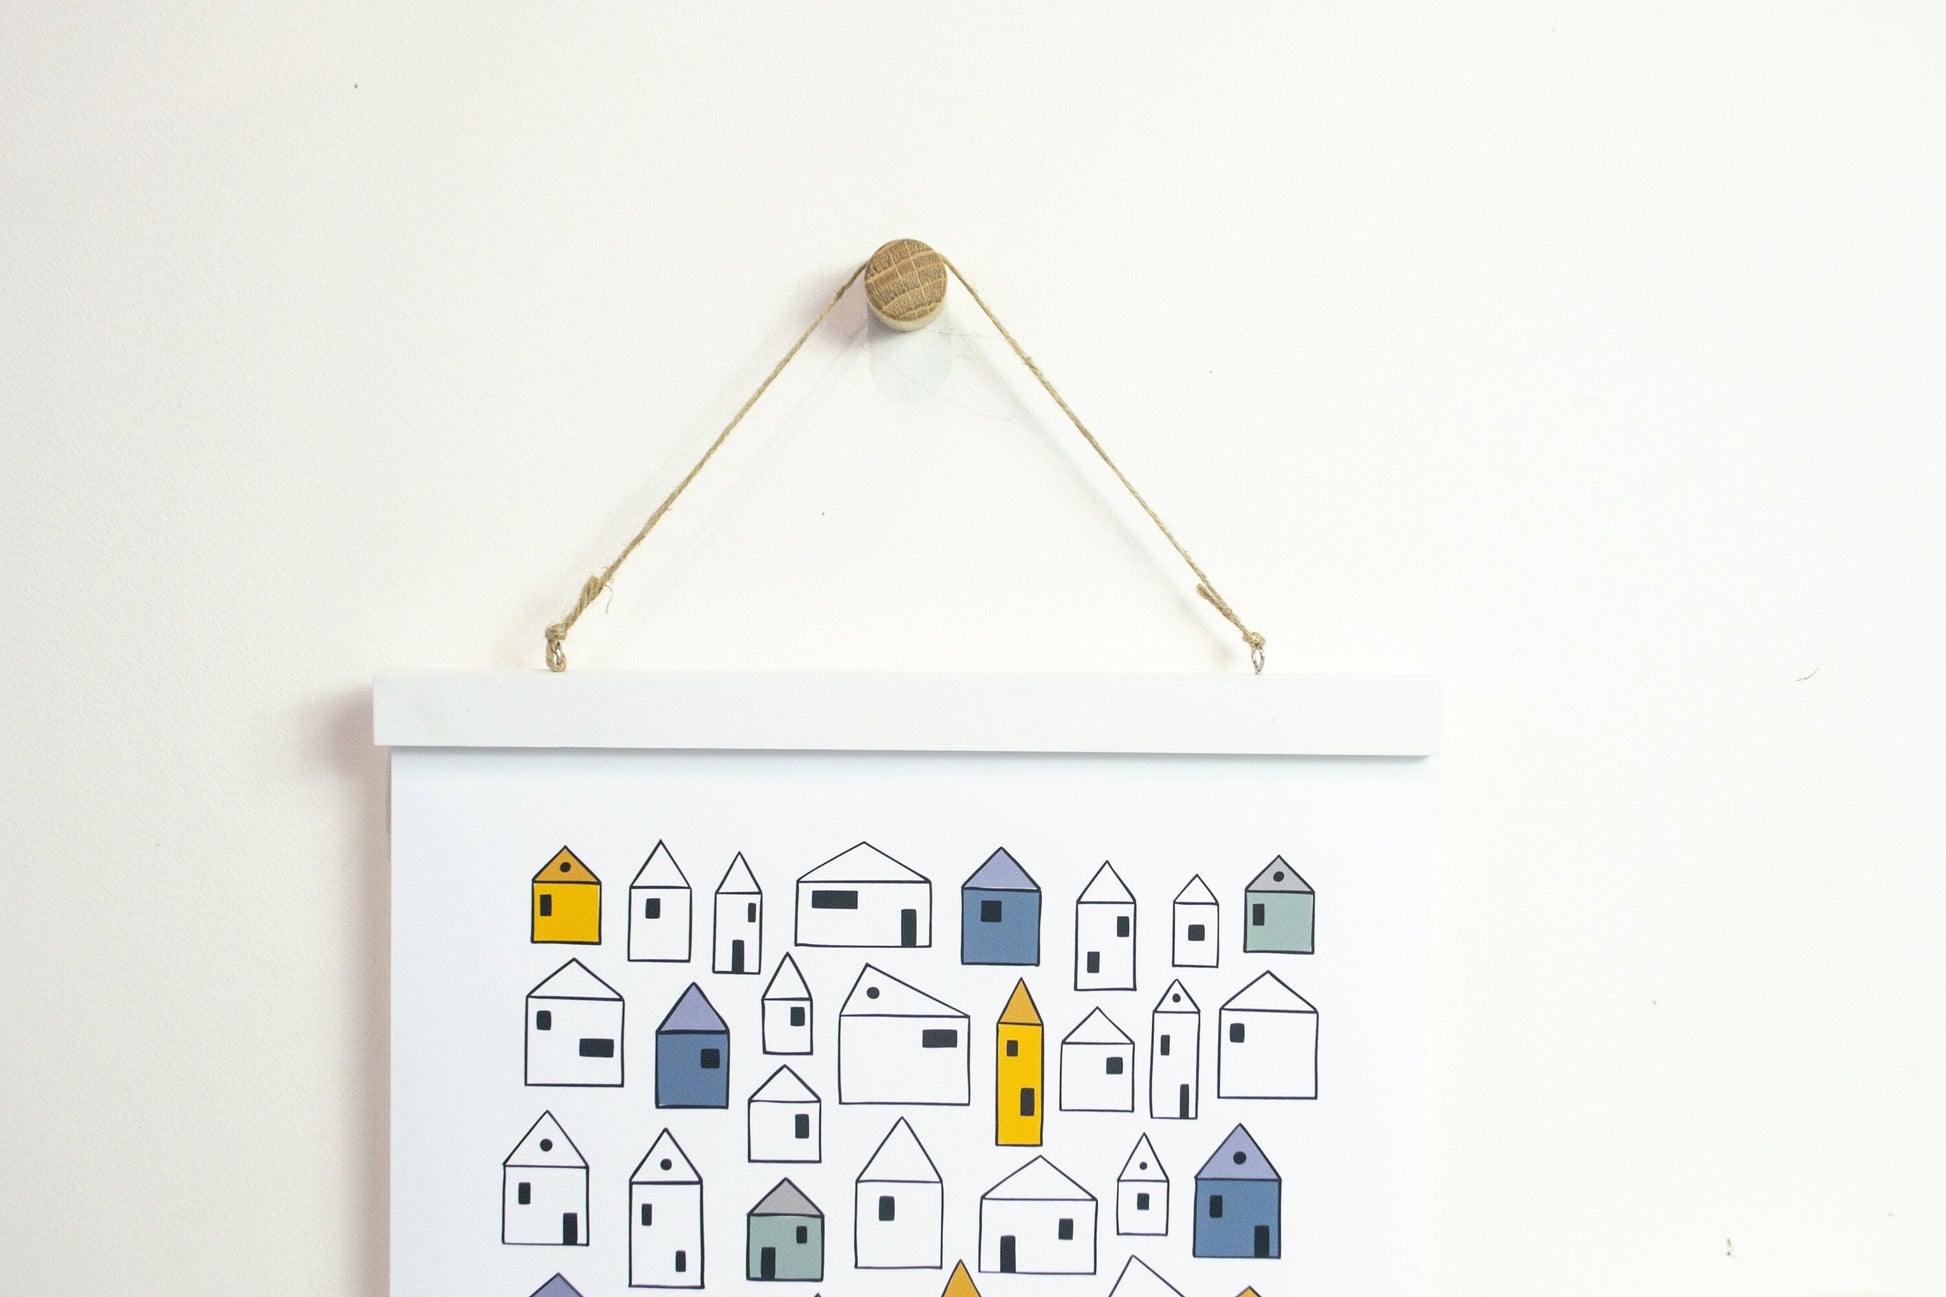 White Magnetic Poster Hanger - Magnetic picture hangers